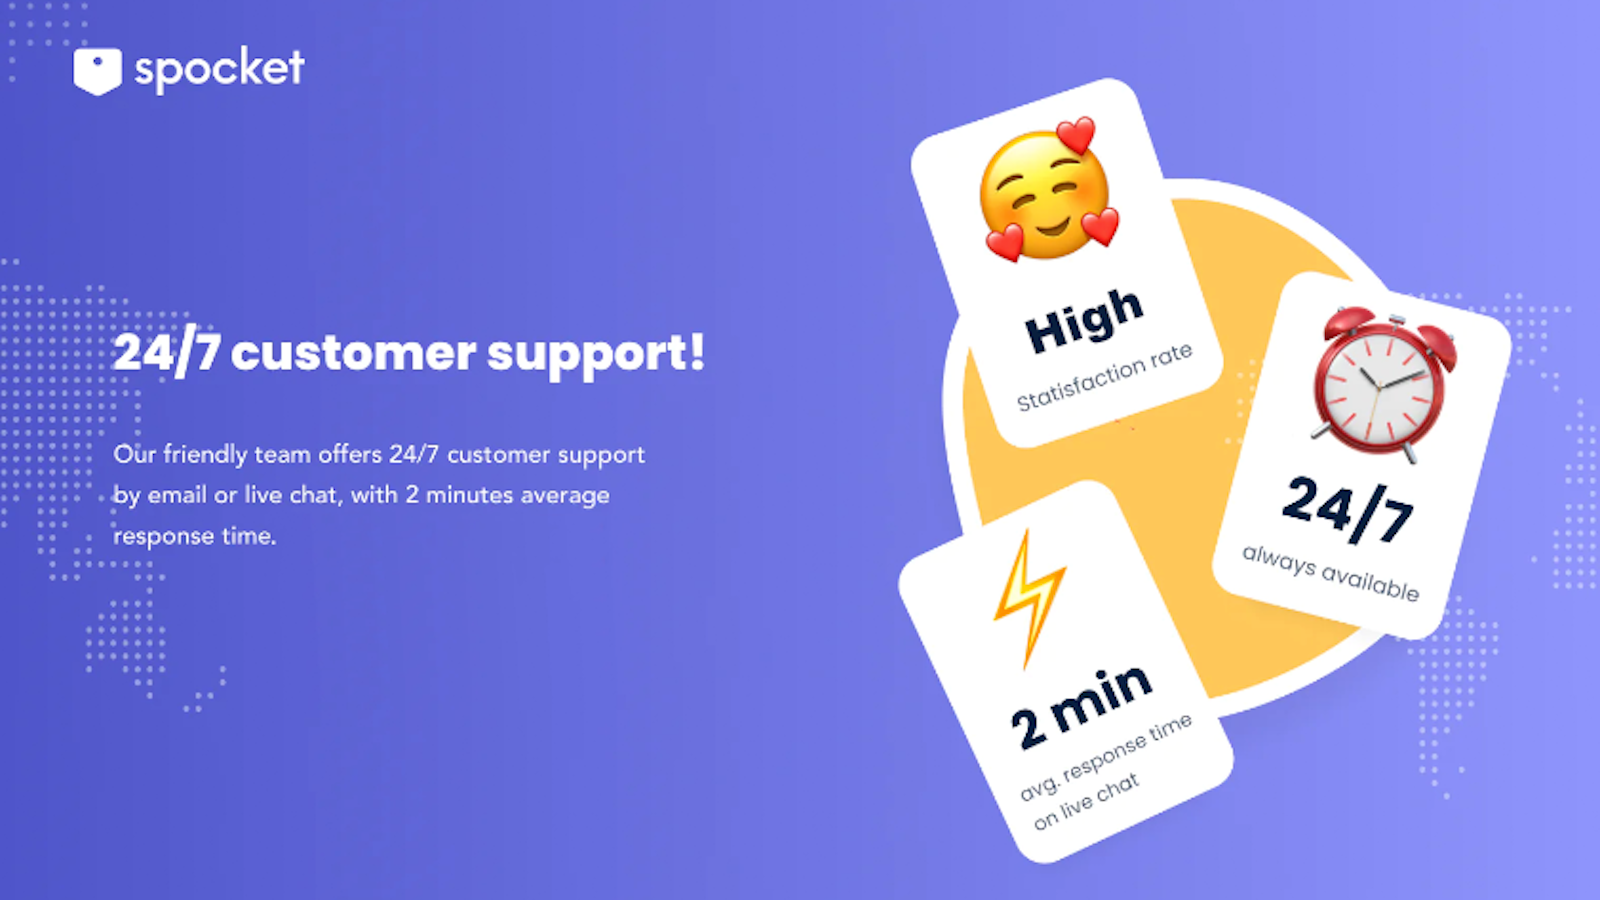 Always available - 24x7 customer support